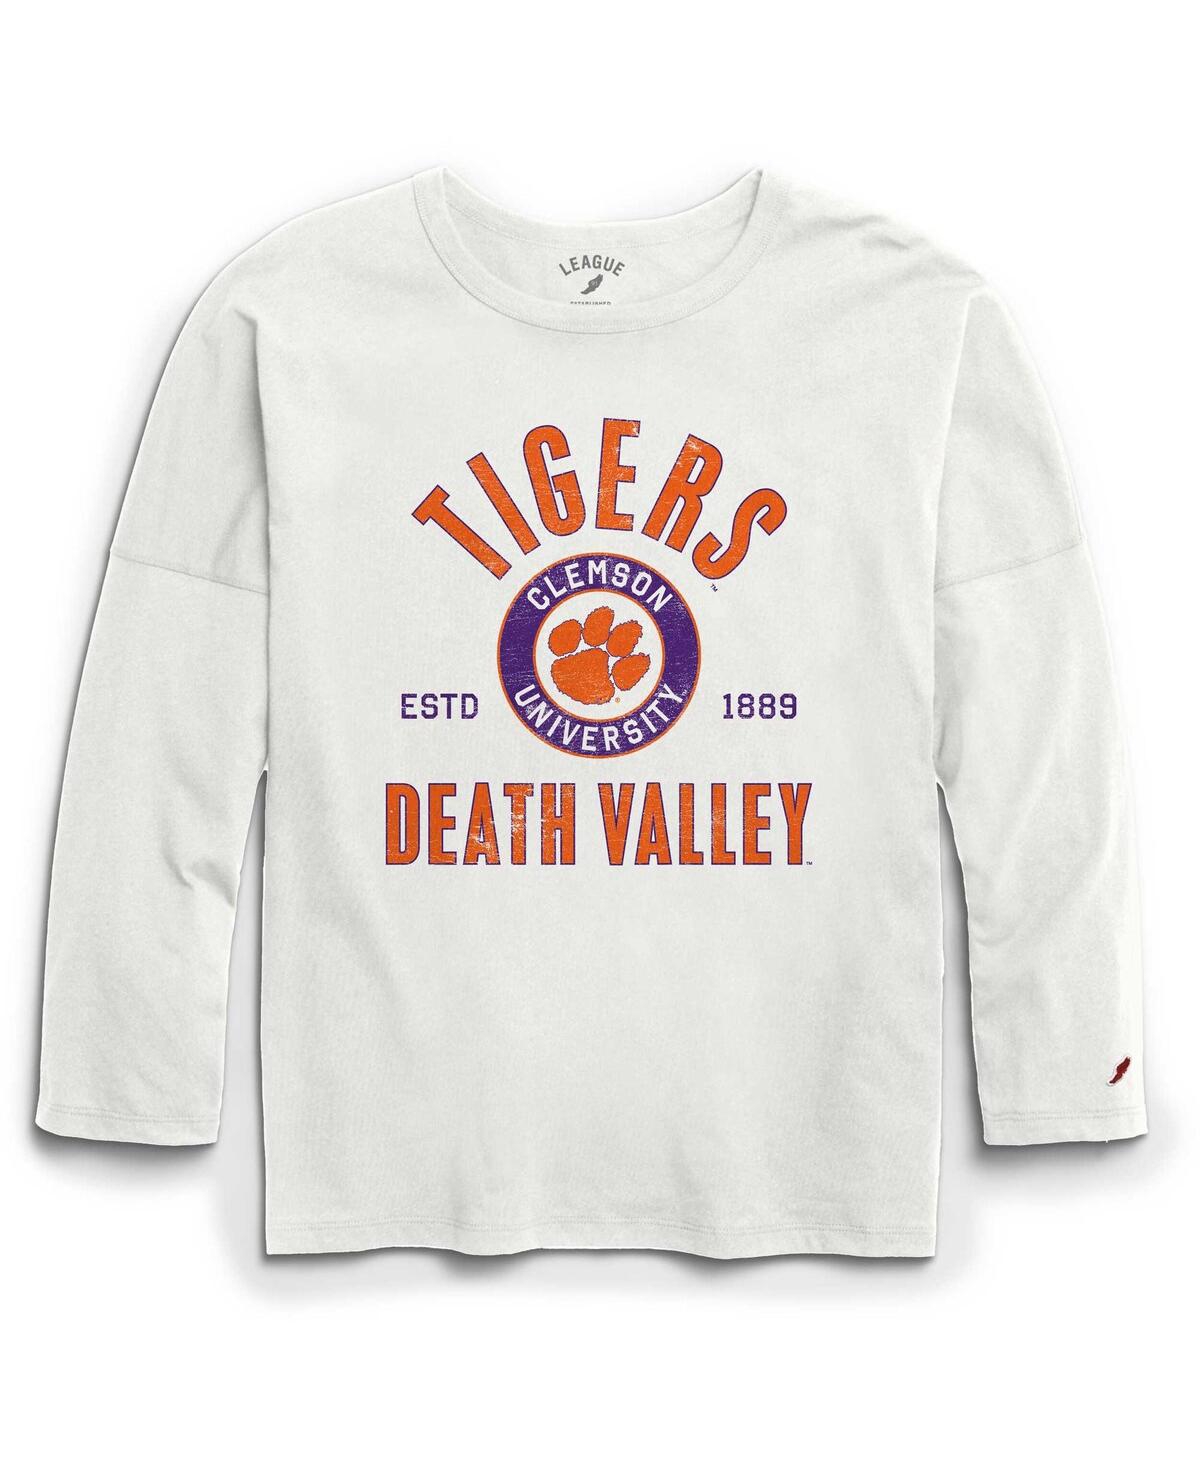 Women's League Collegiate Wear White Distressed Clemson Tigers Clothesline Oversized Long Sleeve T-shirt - White